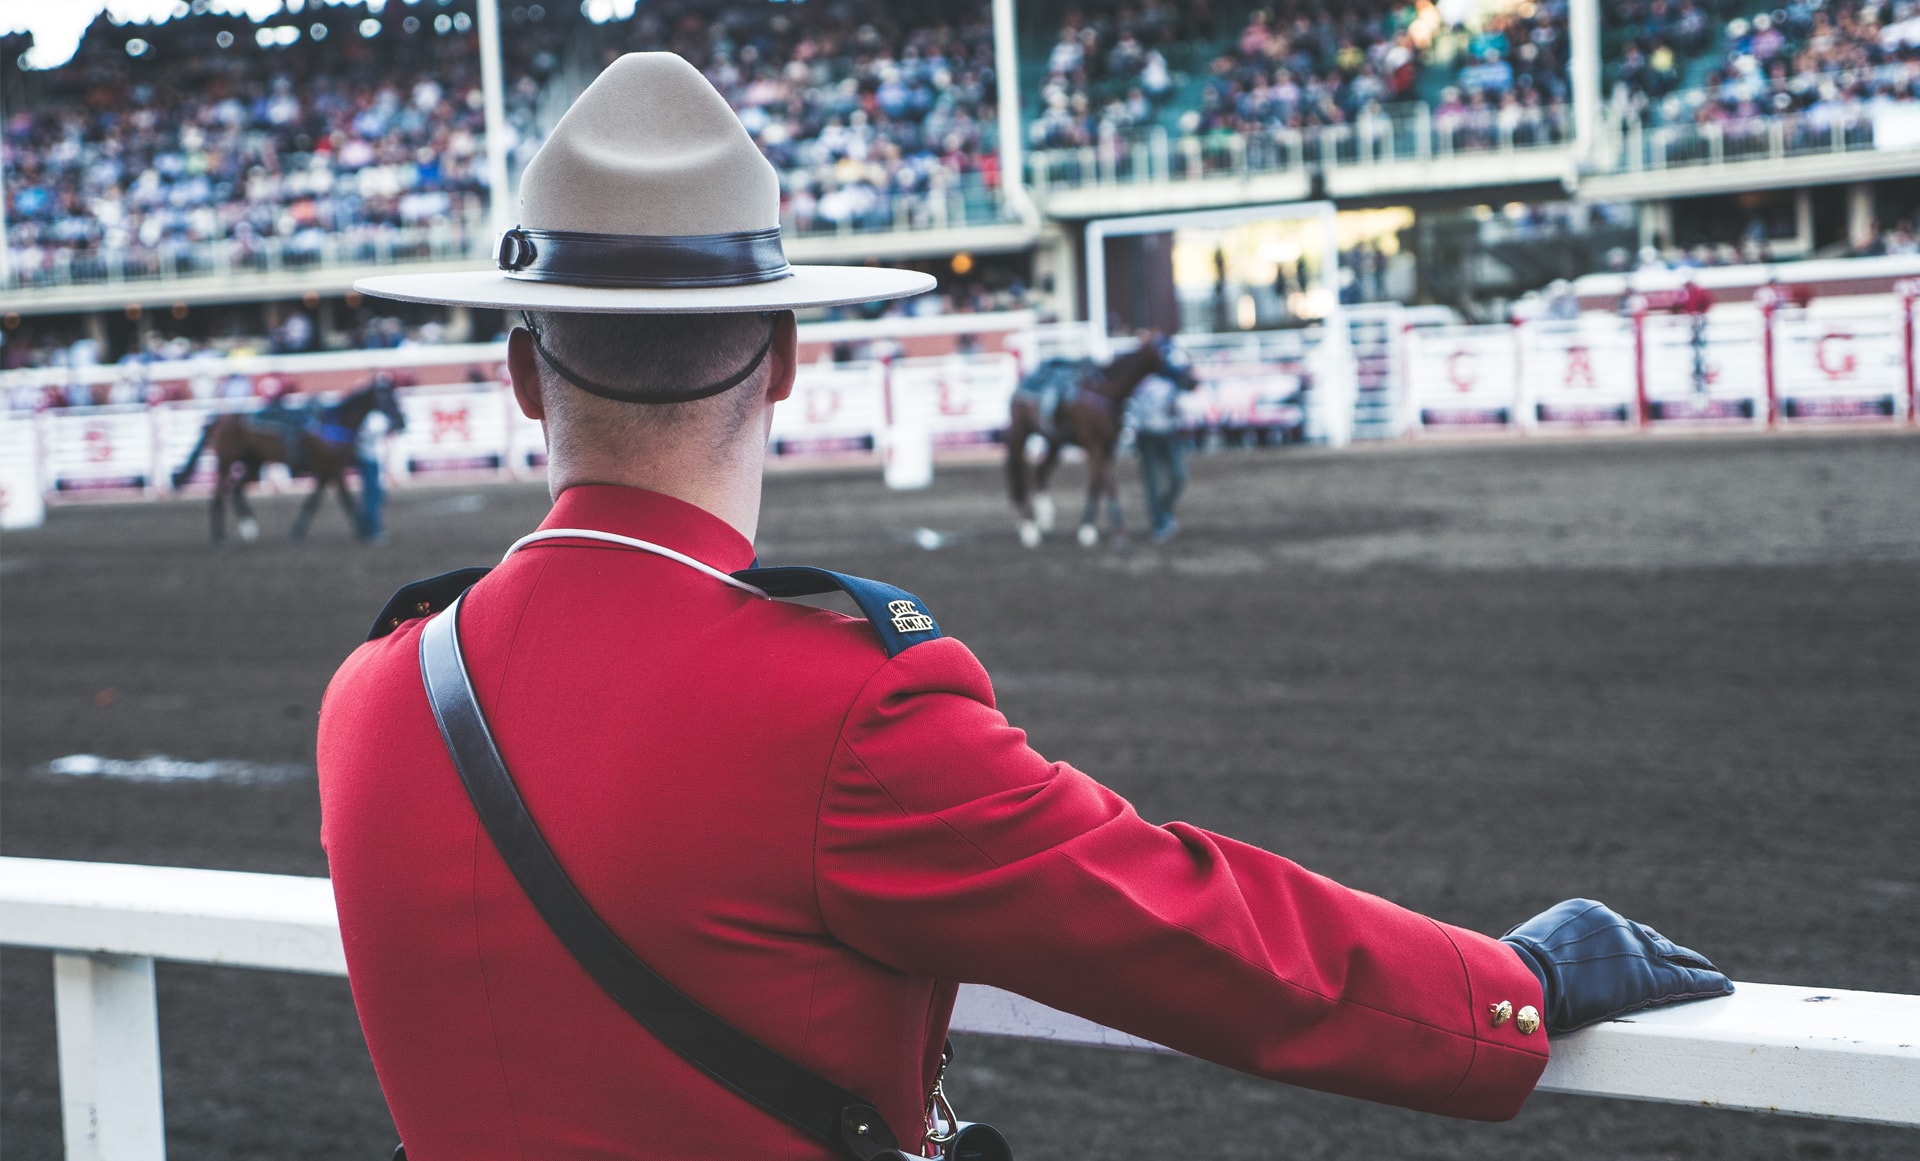 An RCMP officer in uniform looking out at a couple horses and riders performing during the Calgary Stampede.